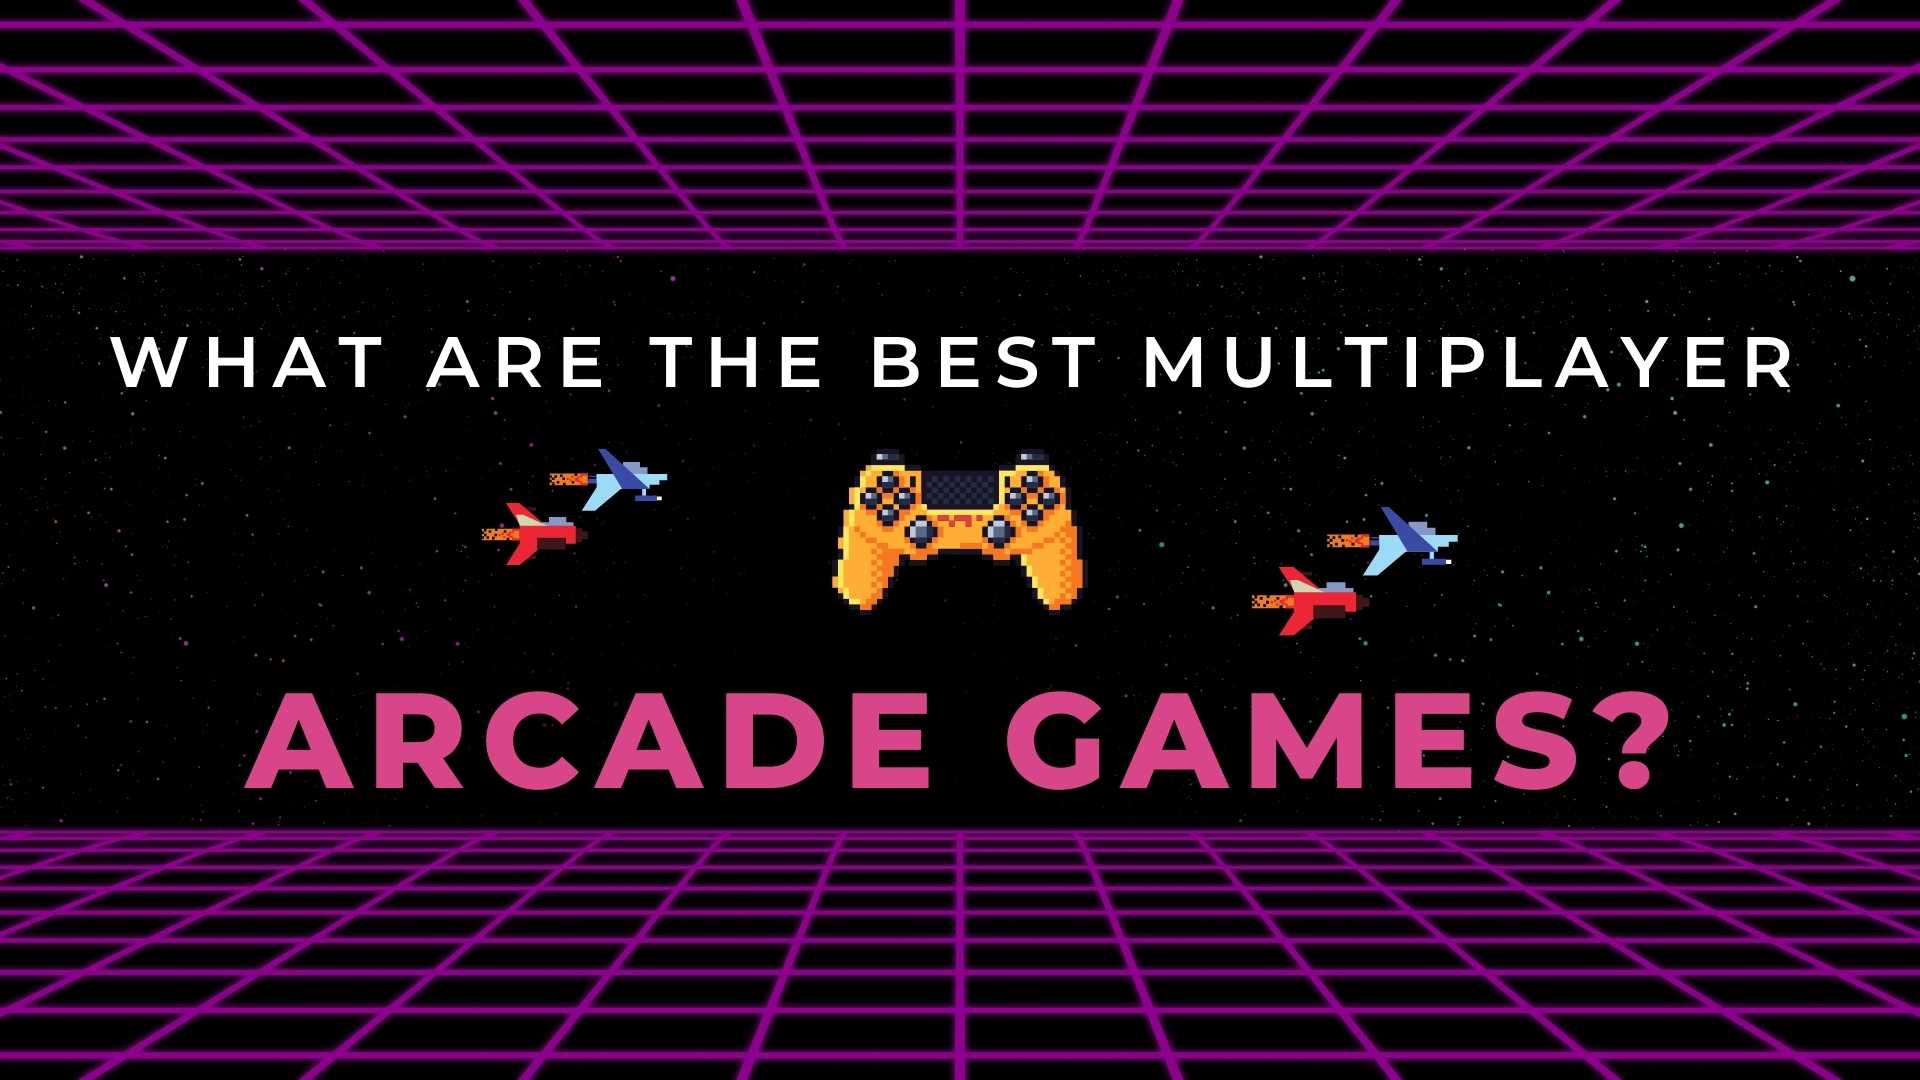 Retro Games: The Ultimate Destination For Classic Gaming Fans